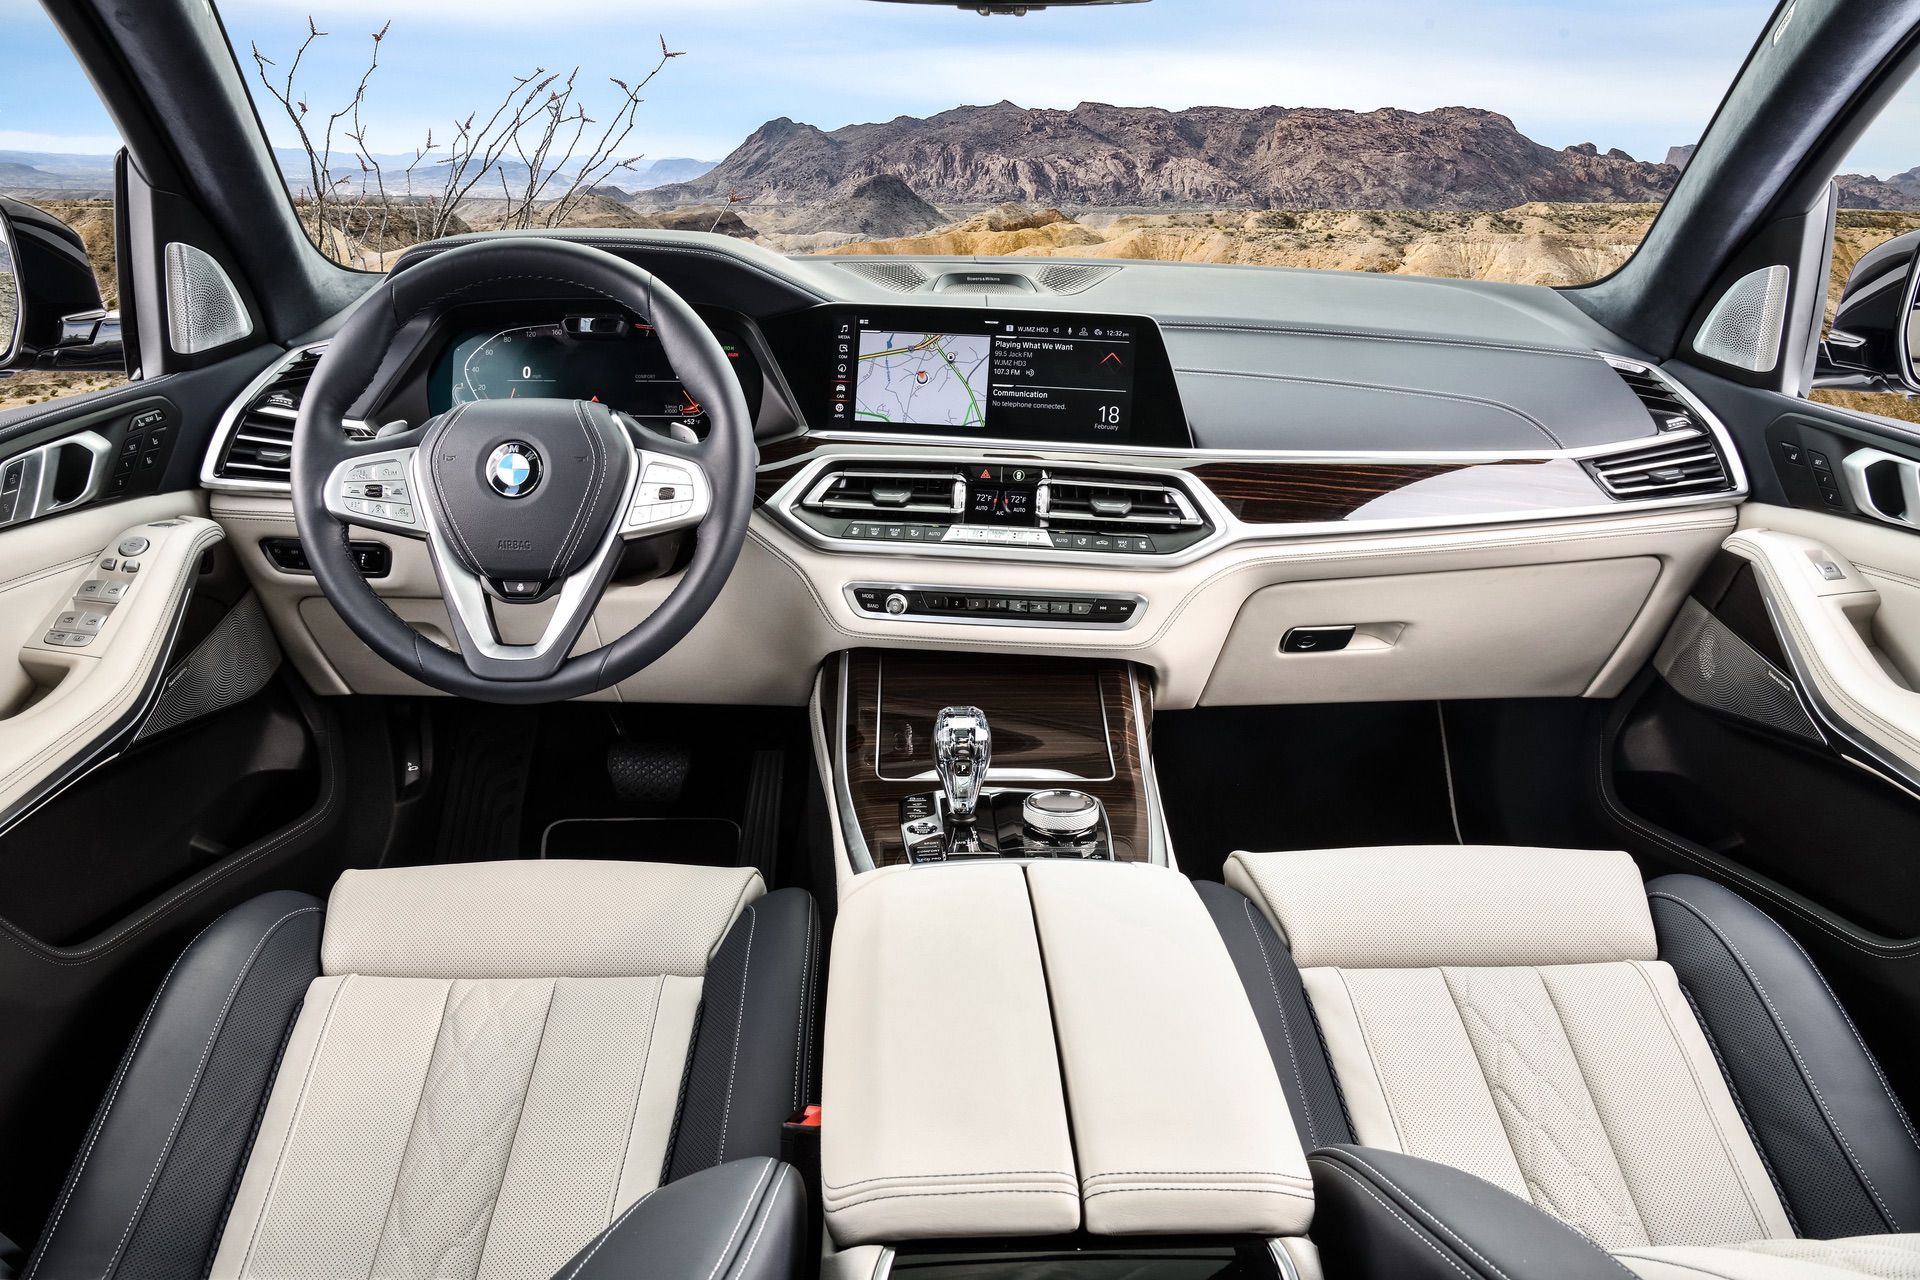 Five Reasons Why The Bmw X7 Is The Ultimate Luxury Bimmer